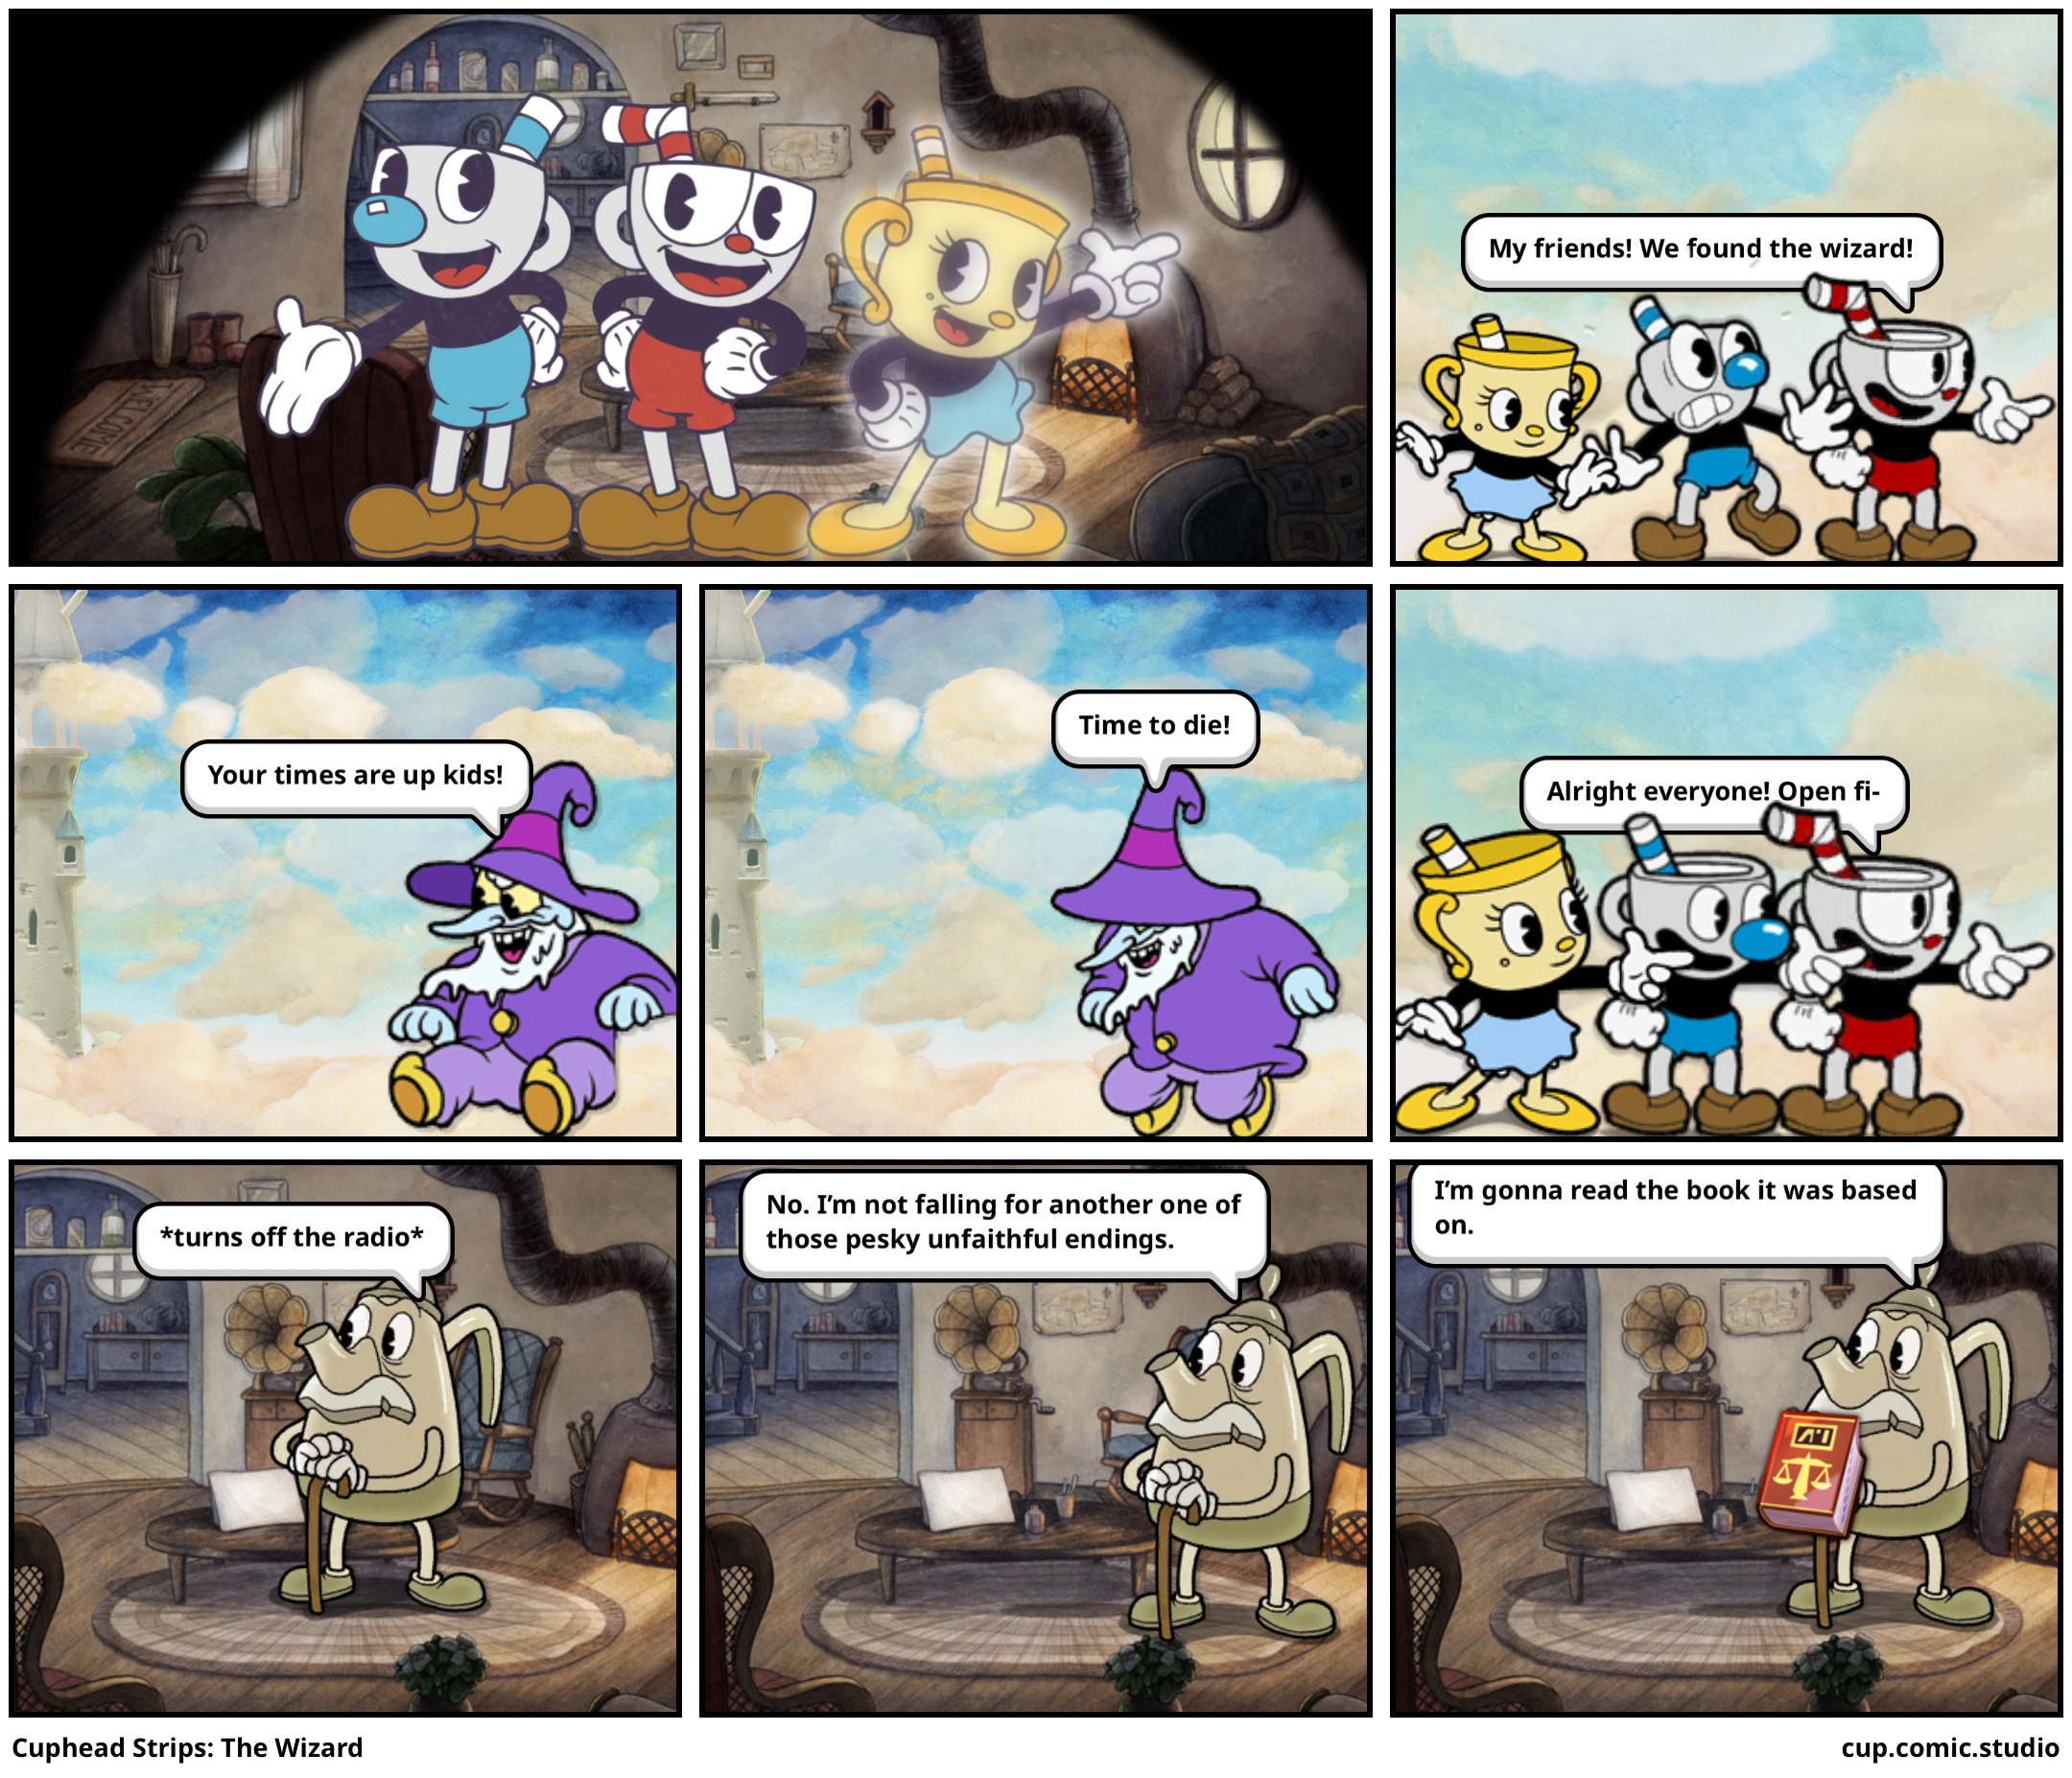 Cuphead Strips: The Wizard